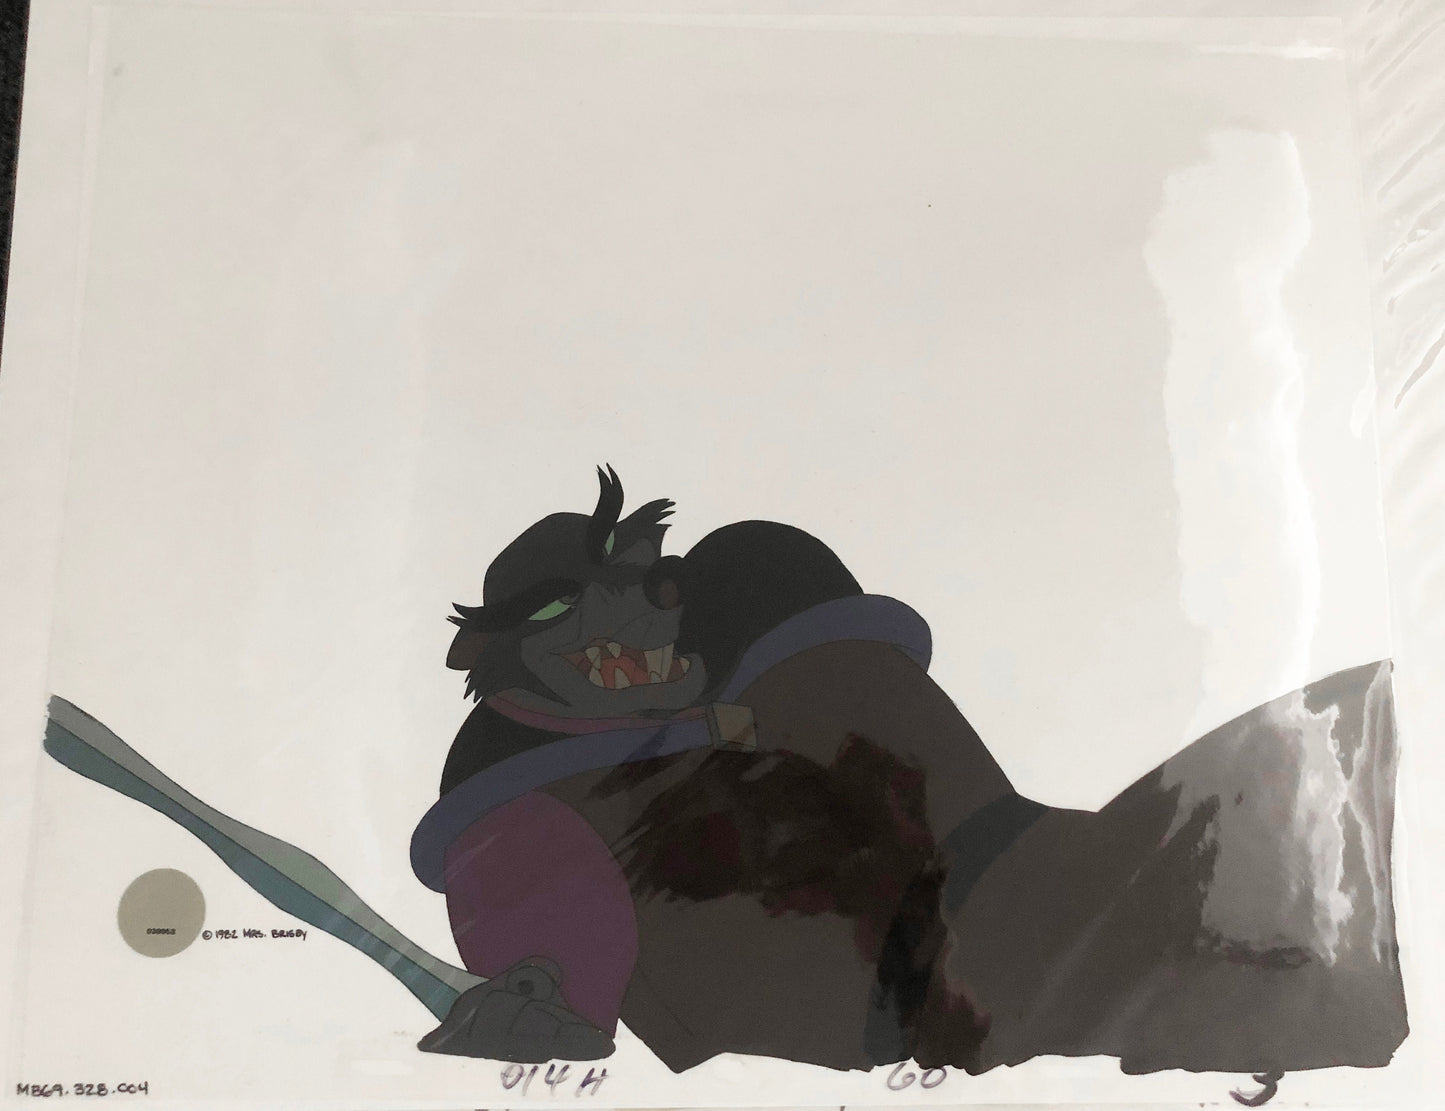 Don Bluth Secret of NIMH Jenner 1982 Original Production Animation Cel Used to make the cartoon 328-004